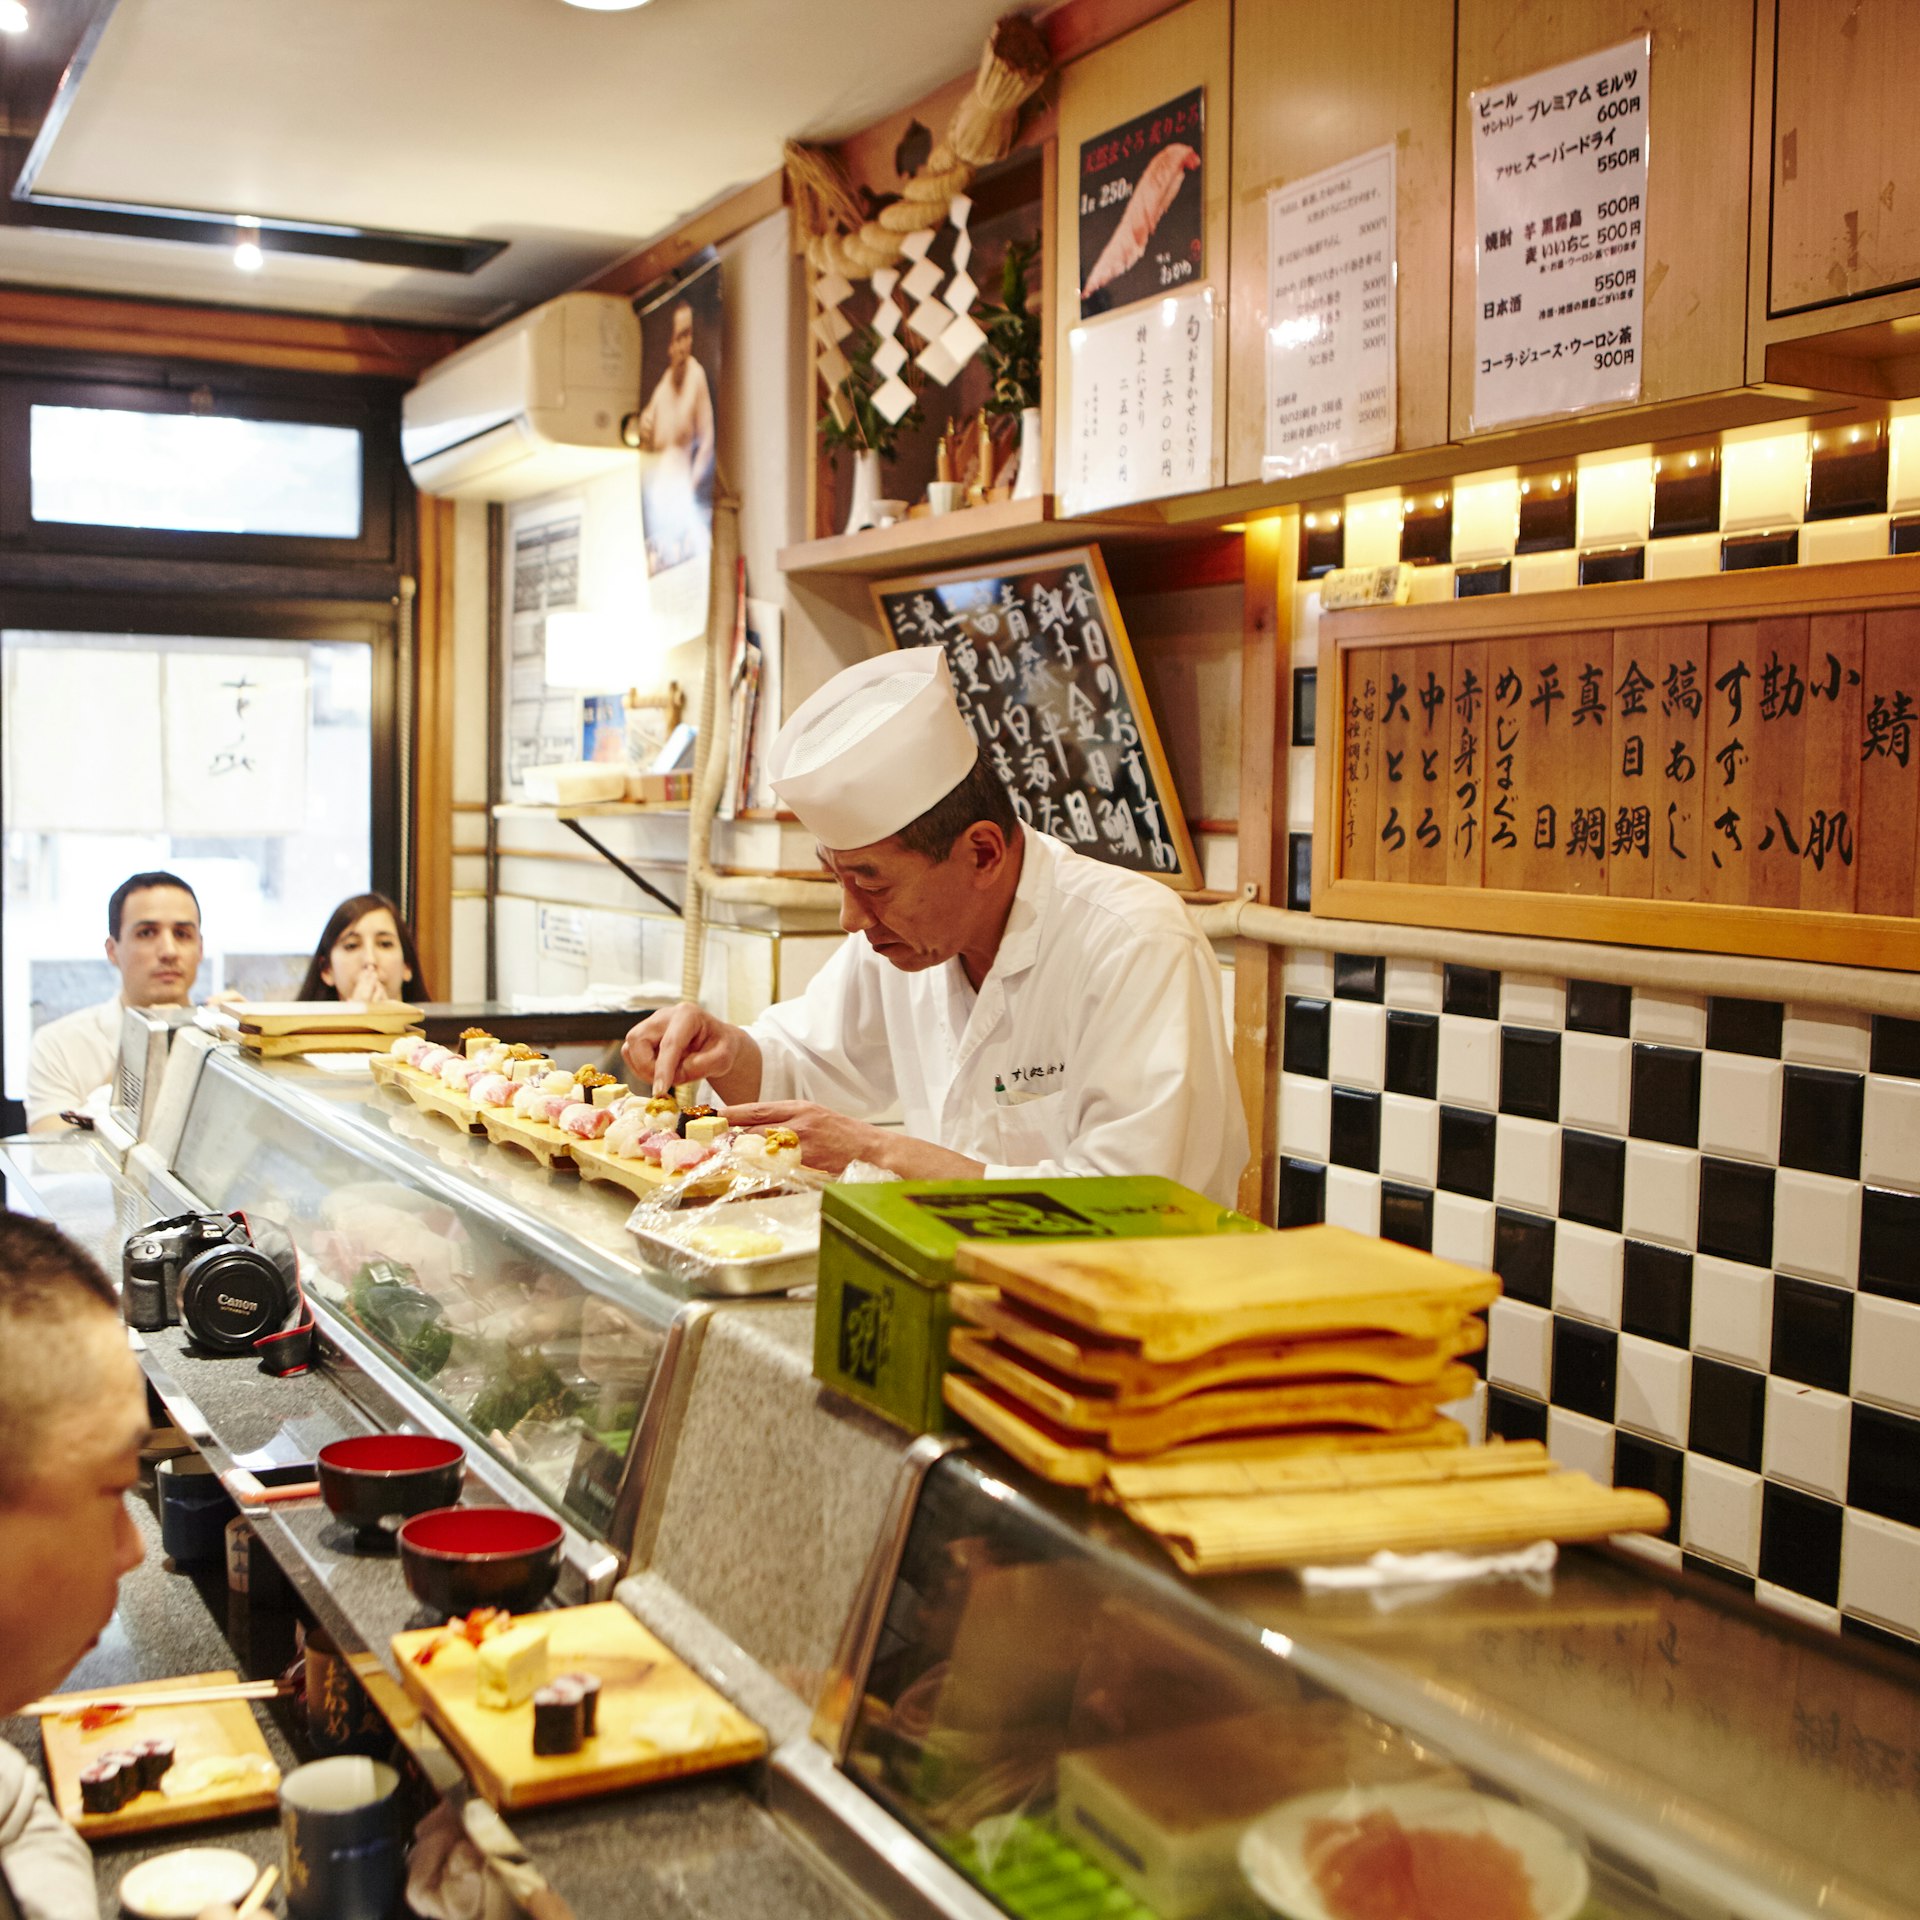 A chef carefully prepares small dishes of sushi behind a counter with two diners looking on